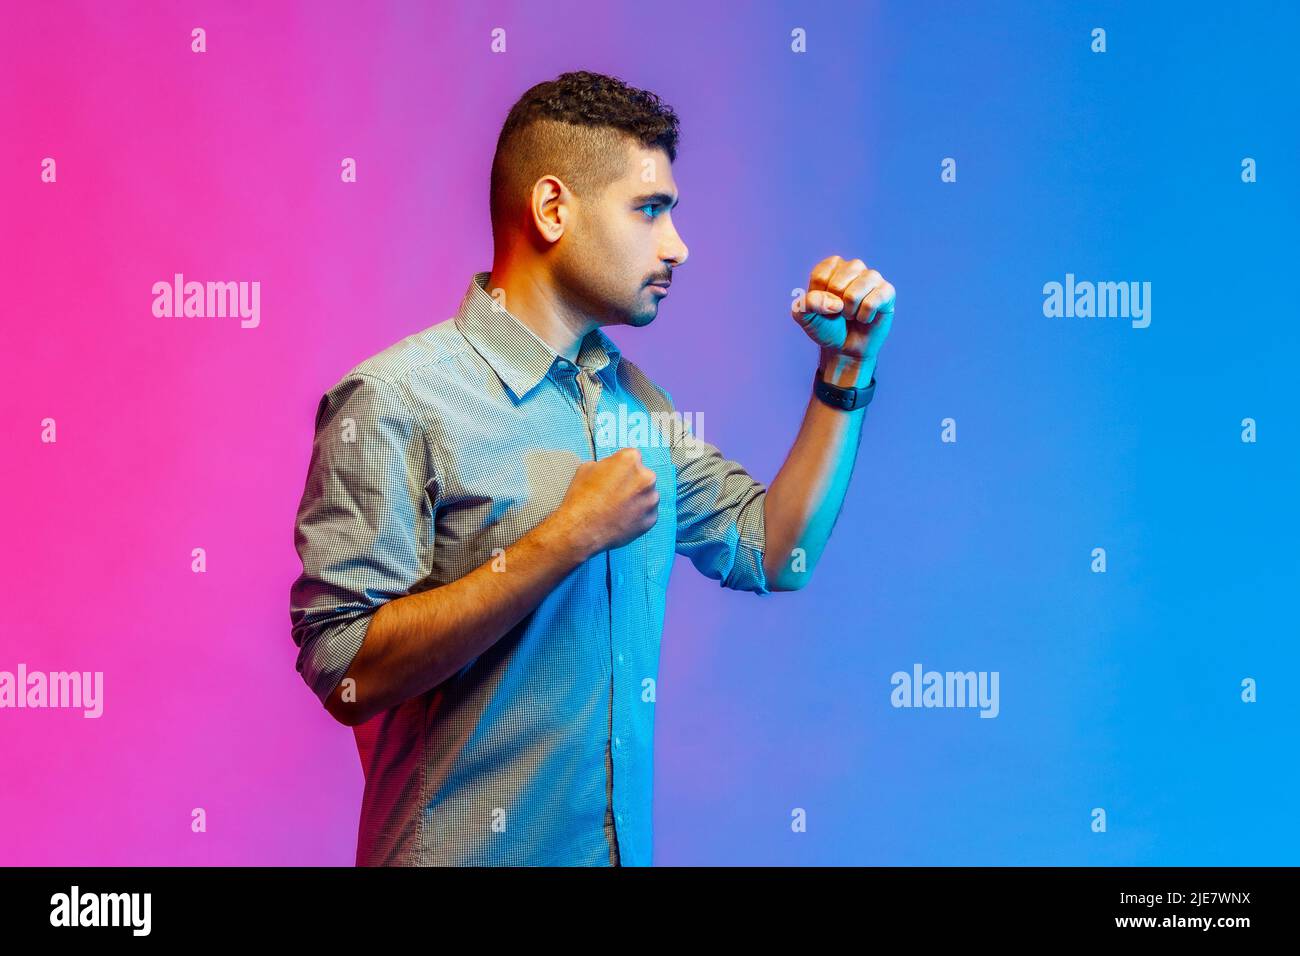 Side view portrait of young adult angry aggressive man in shirt punching, boxing with clenched fists, being ready fighting. Indoor studio shot isolated on colorful neon light background. Stock Photo